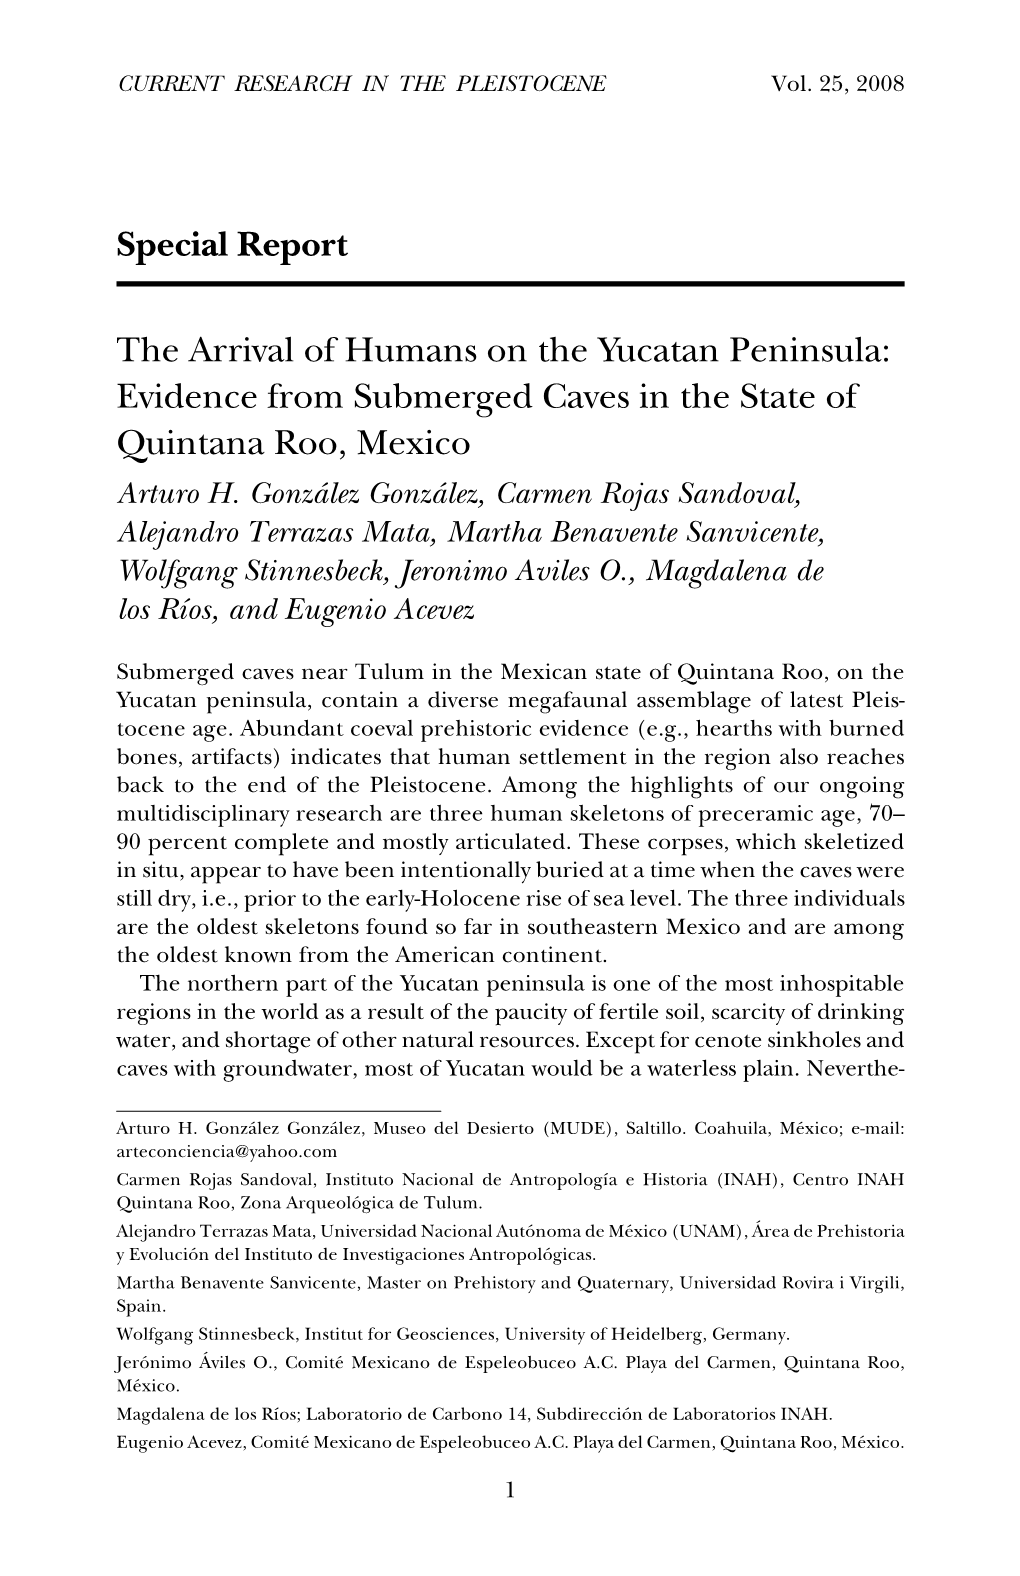 Special Report the Arrival of Humans on the Yucatan Peninsula